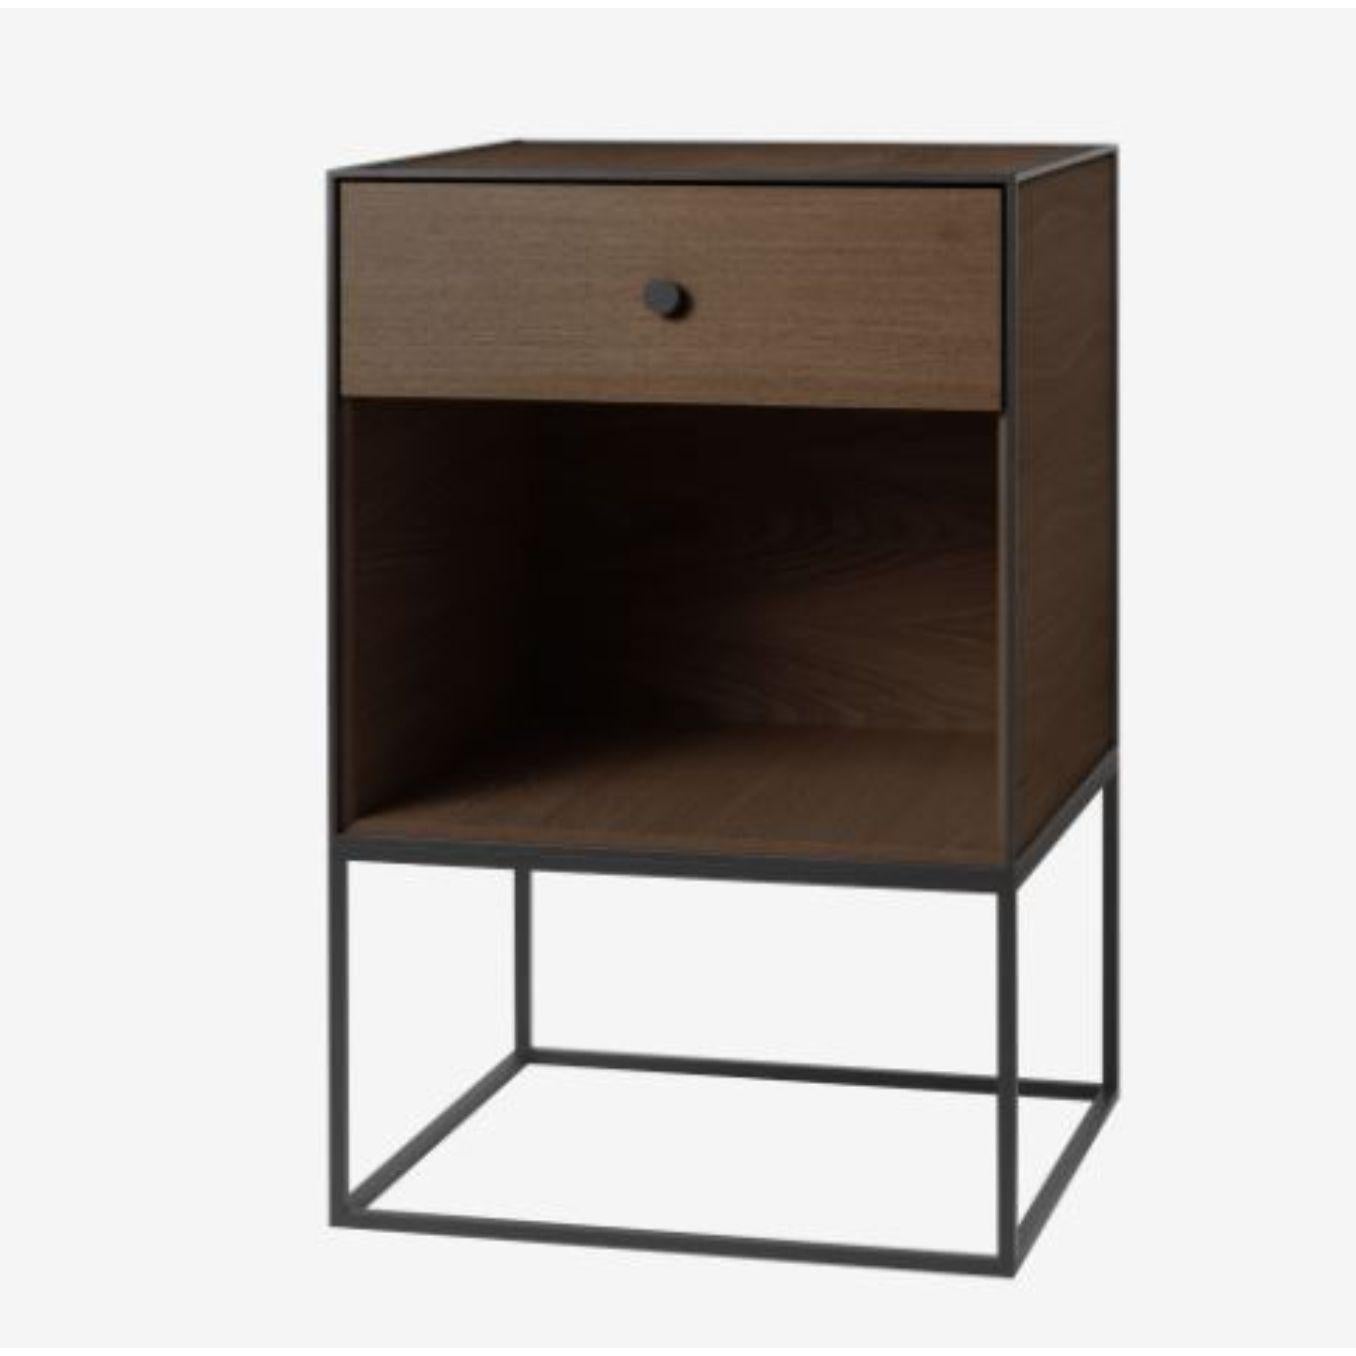 49 smoked oak frame sideboard with 1 drawer by Lassen
Dimensions: W 49 x D 42 x H 77 cm 
Materials: Finér, melamin, melamine, metal, veneer, oak
Also available in different colours and dimensions.
Weight: 15.50 kg

By Lassen is a Danish design